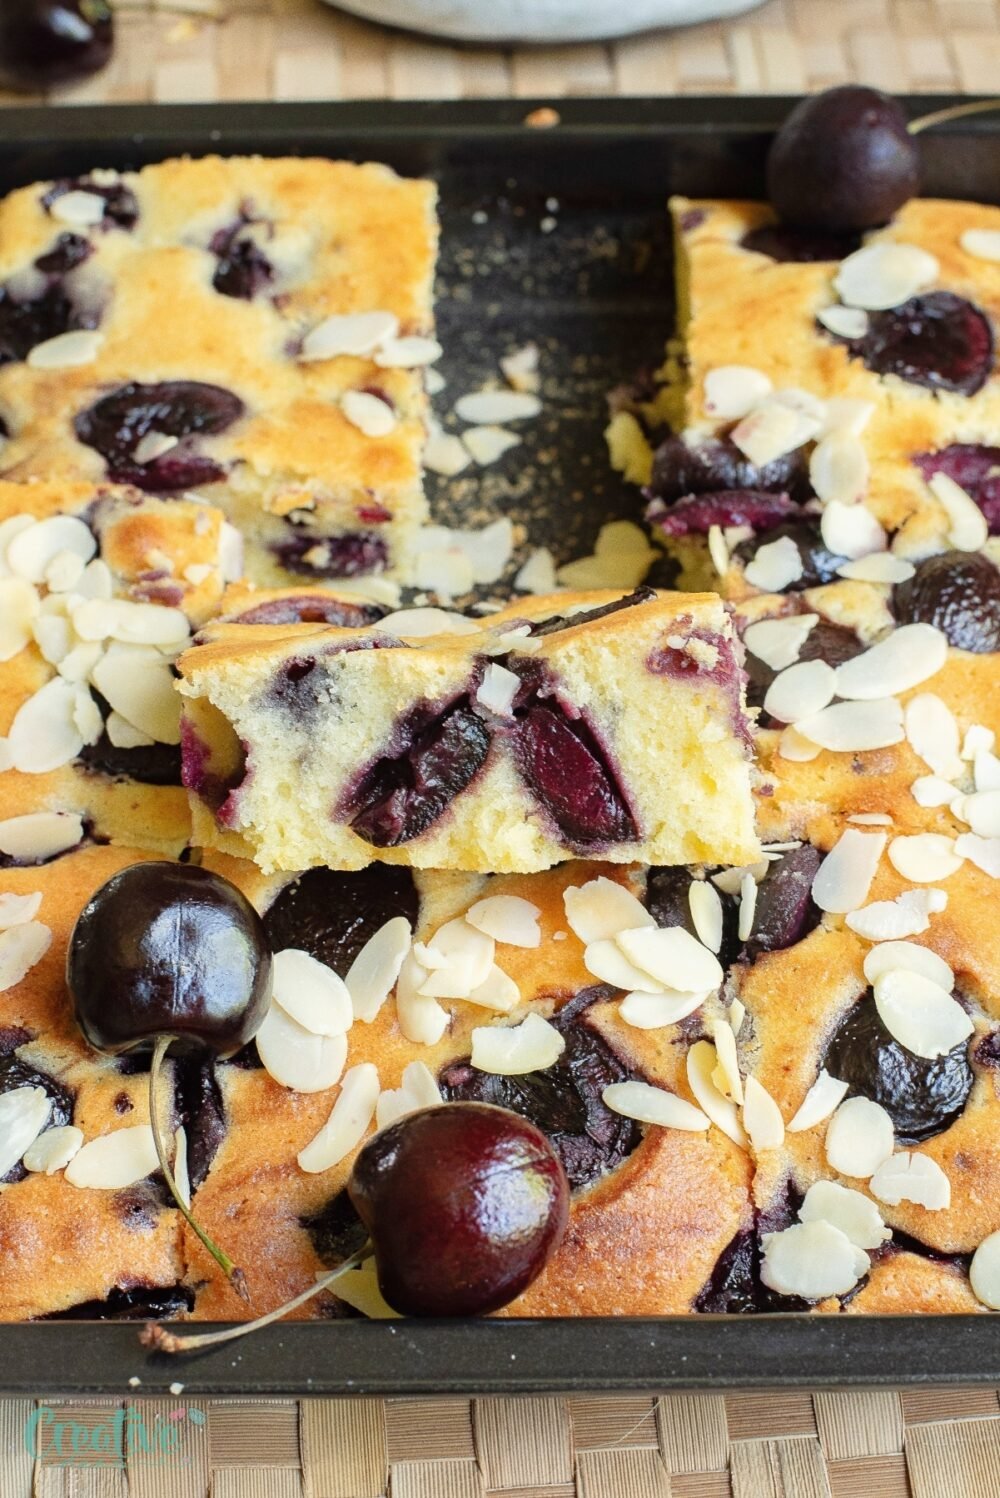 Treat yourself to a mouthwatering easy cherry cake, topped with succulent cherries and a sprinkle of crunchy almonds.